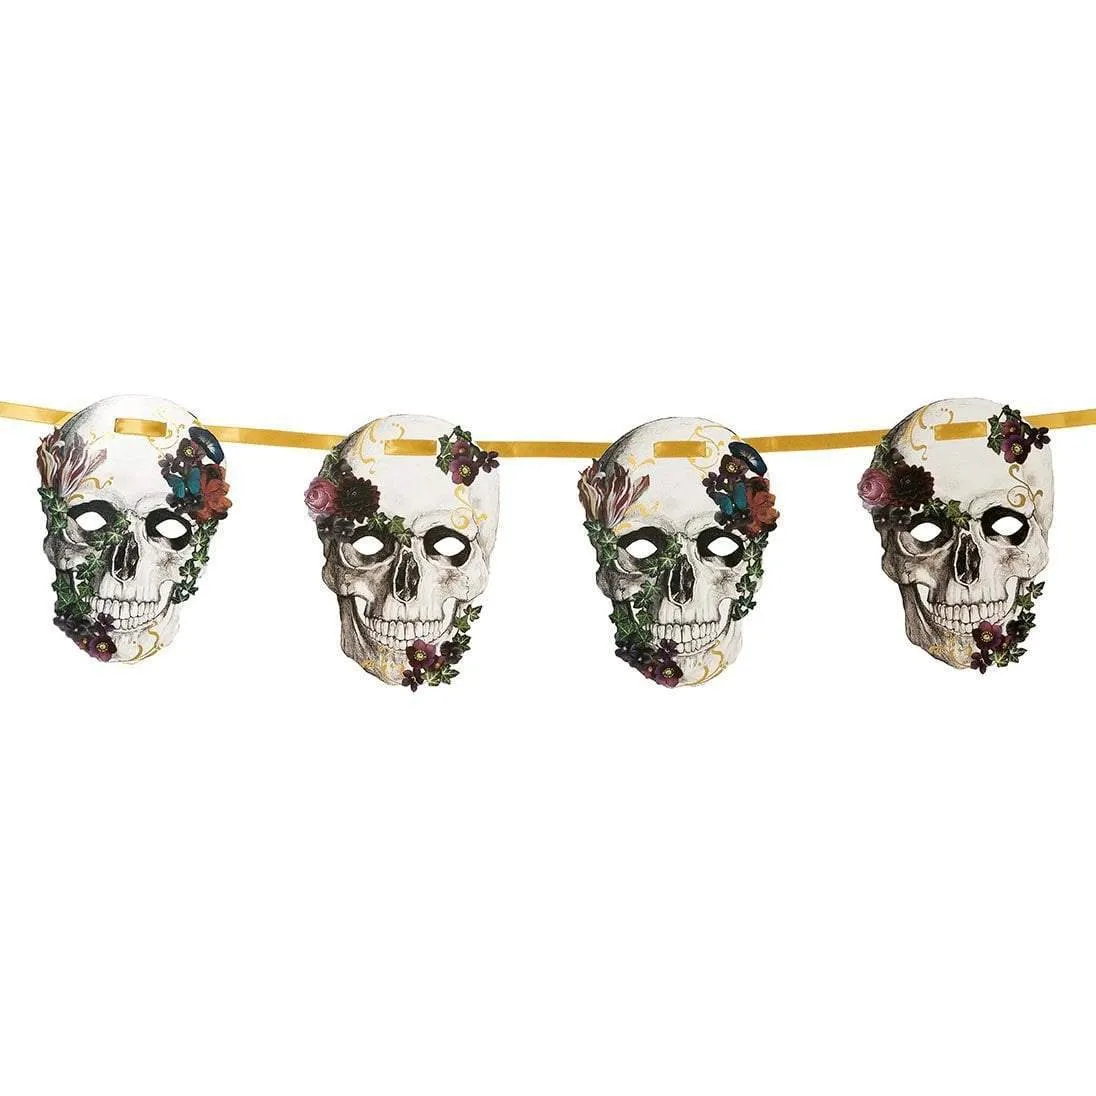 A decorative paper garland featuring skulls adorned with baroque-style flowers threaded onto a gold ribbon.